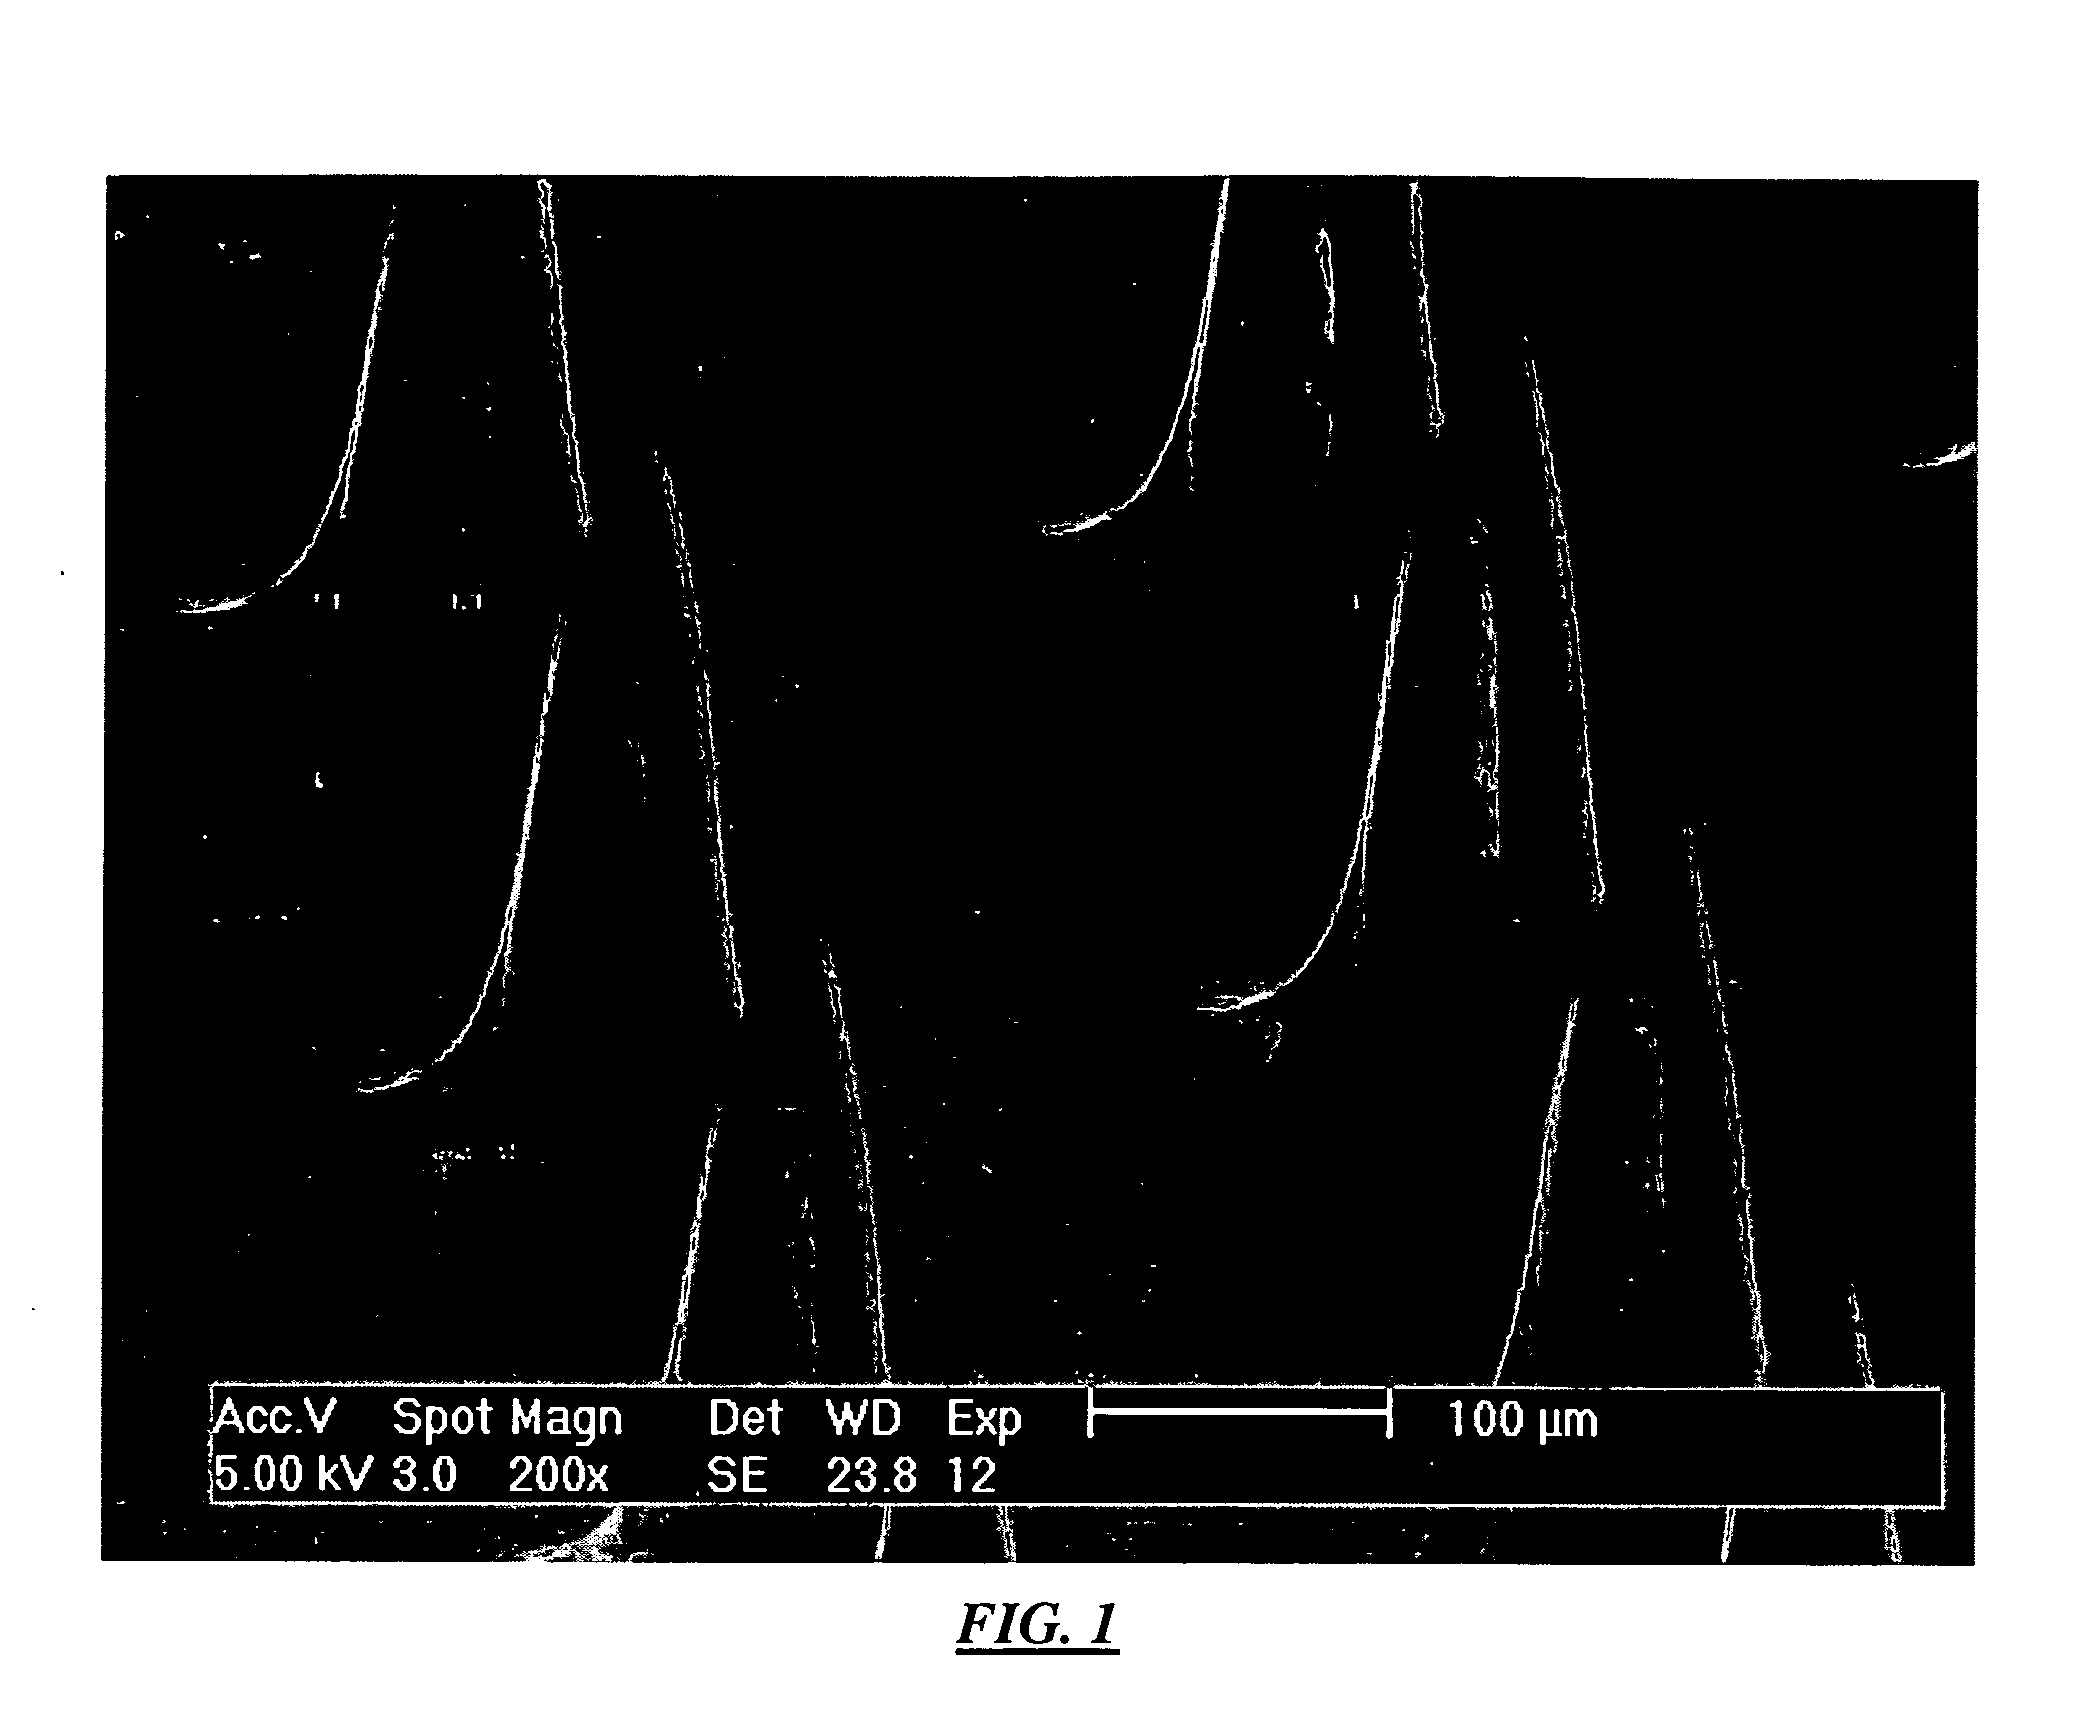 Method and/or apparatus for puncturing a surface for extraction, in situ analysis, and/or substance delivery using microneedles